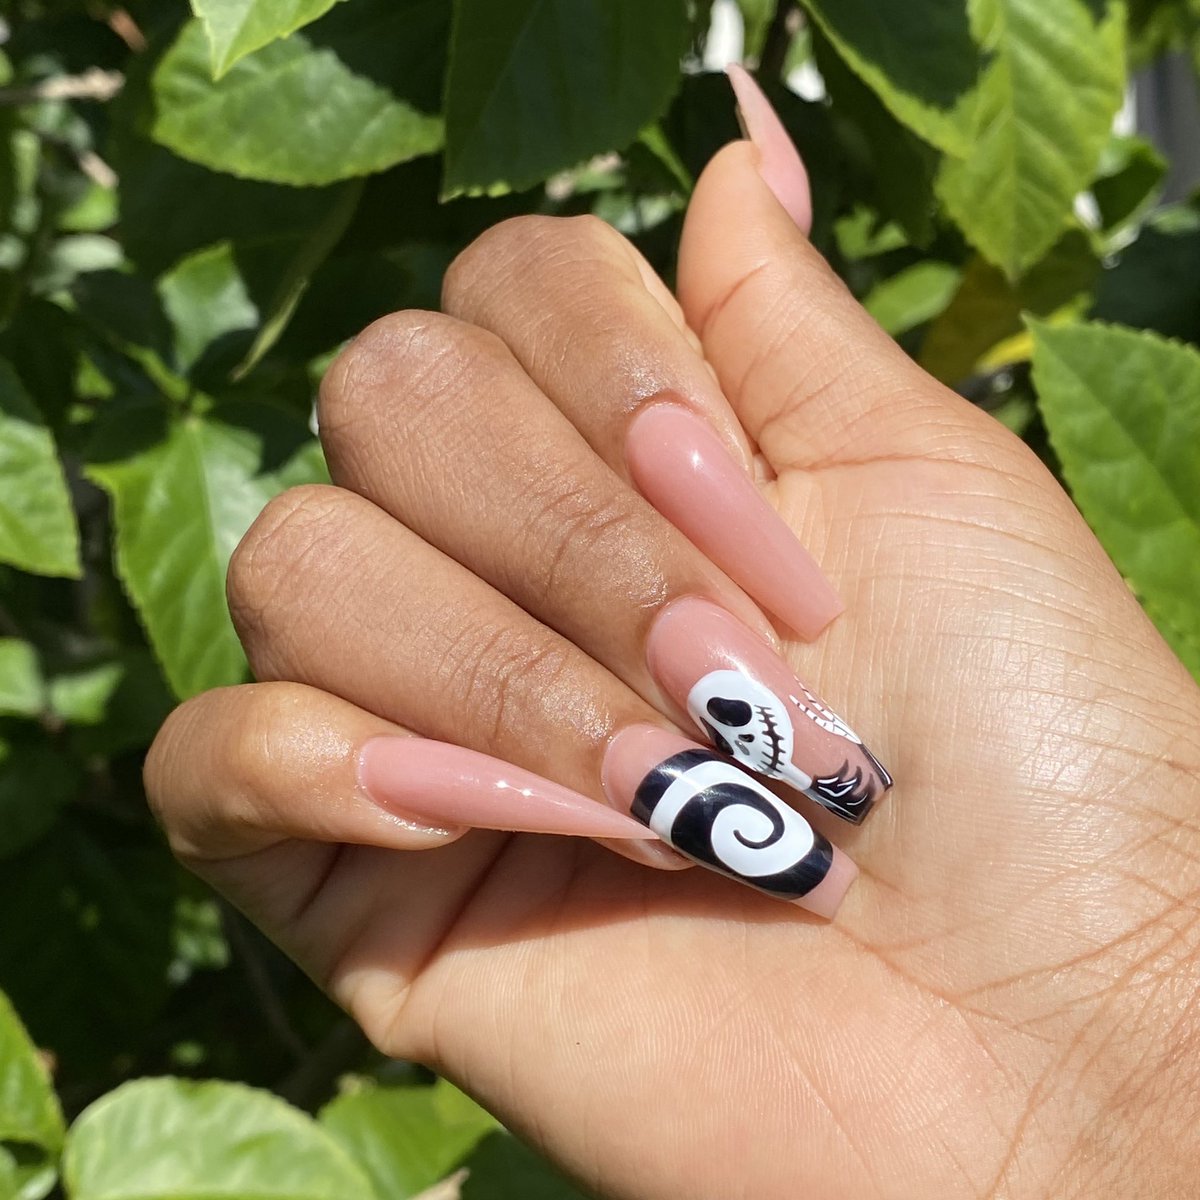 Promoting My Work Because If I Won’t Who Will ❤️ Retweets & Replies Are Free Lmk What You Think 📲 #orlandonails #orlandonailtech #nailart #nails #spookynails #halloween #bombnails